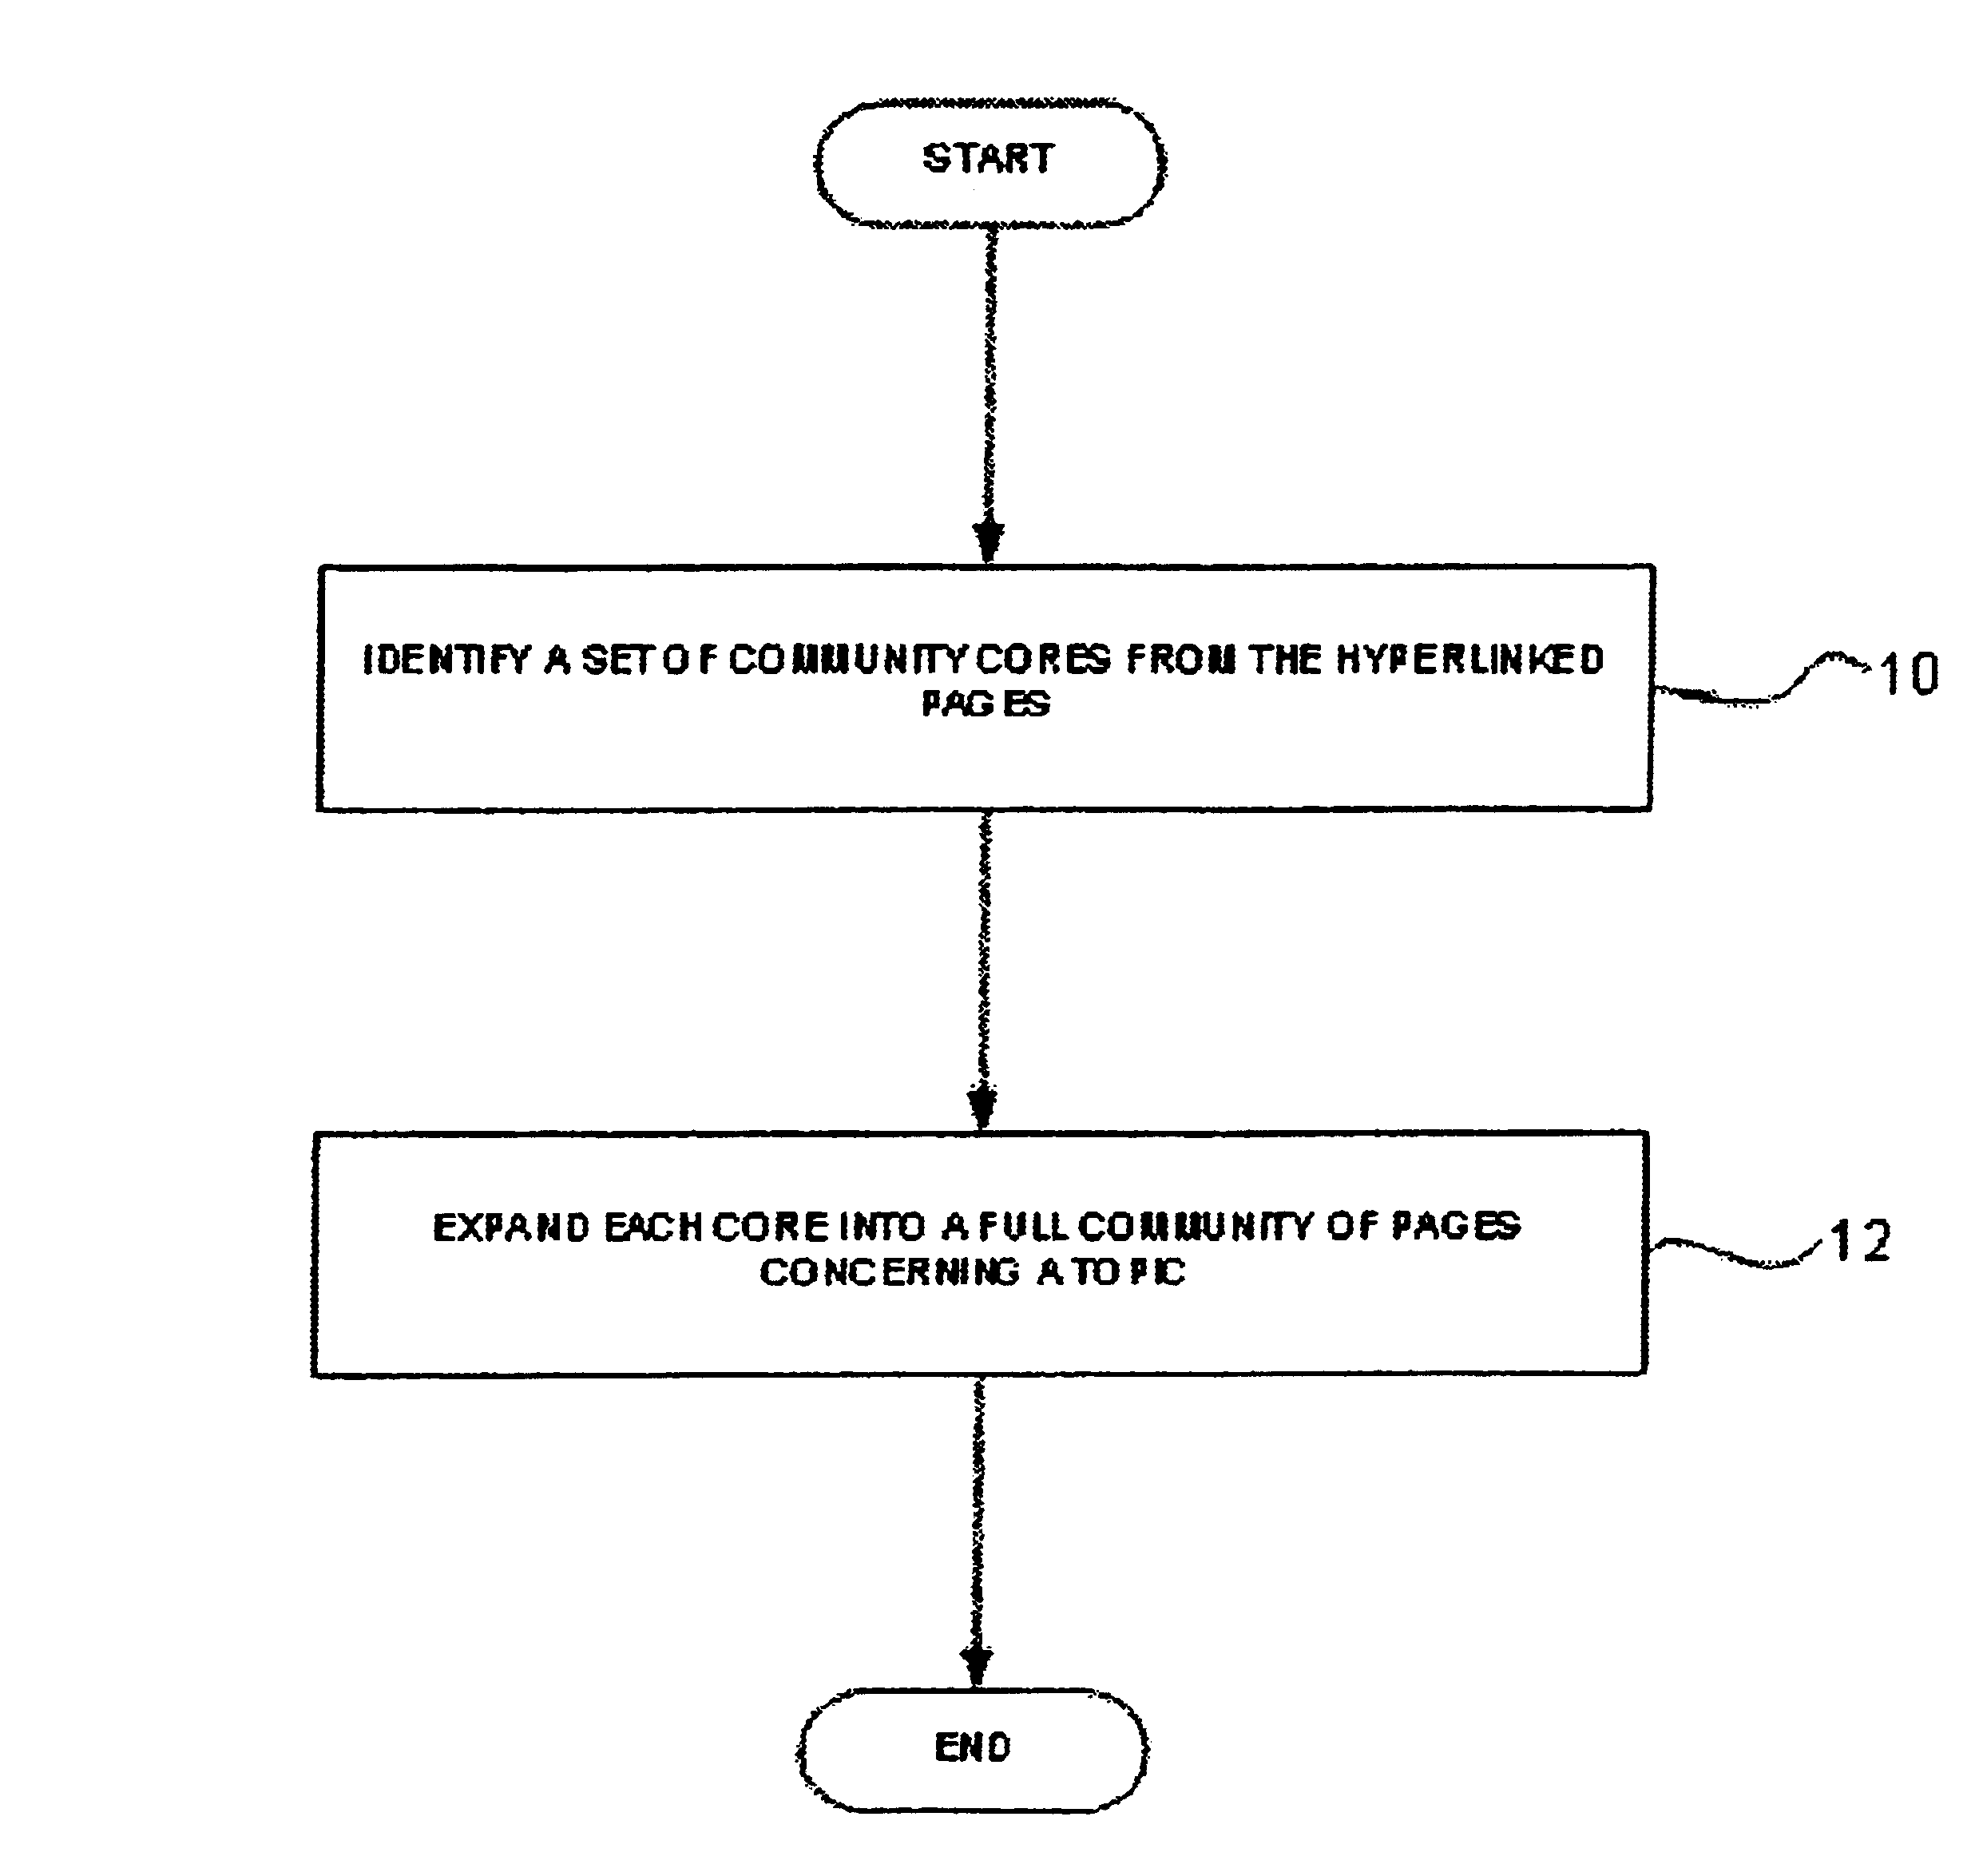 Method and system for trawling the World-wide Web to identify implicitly-defined communities of web pages